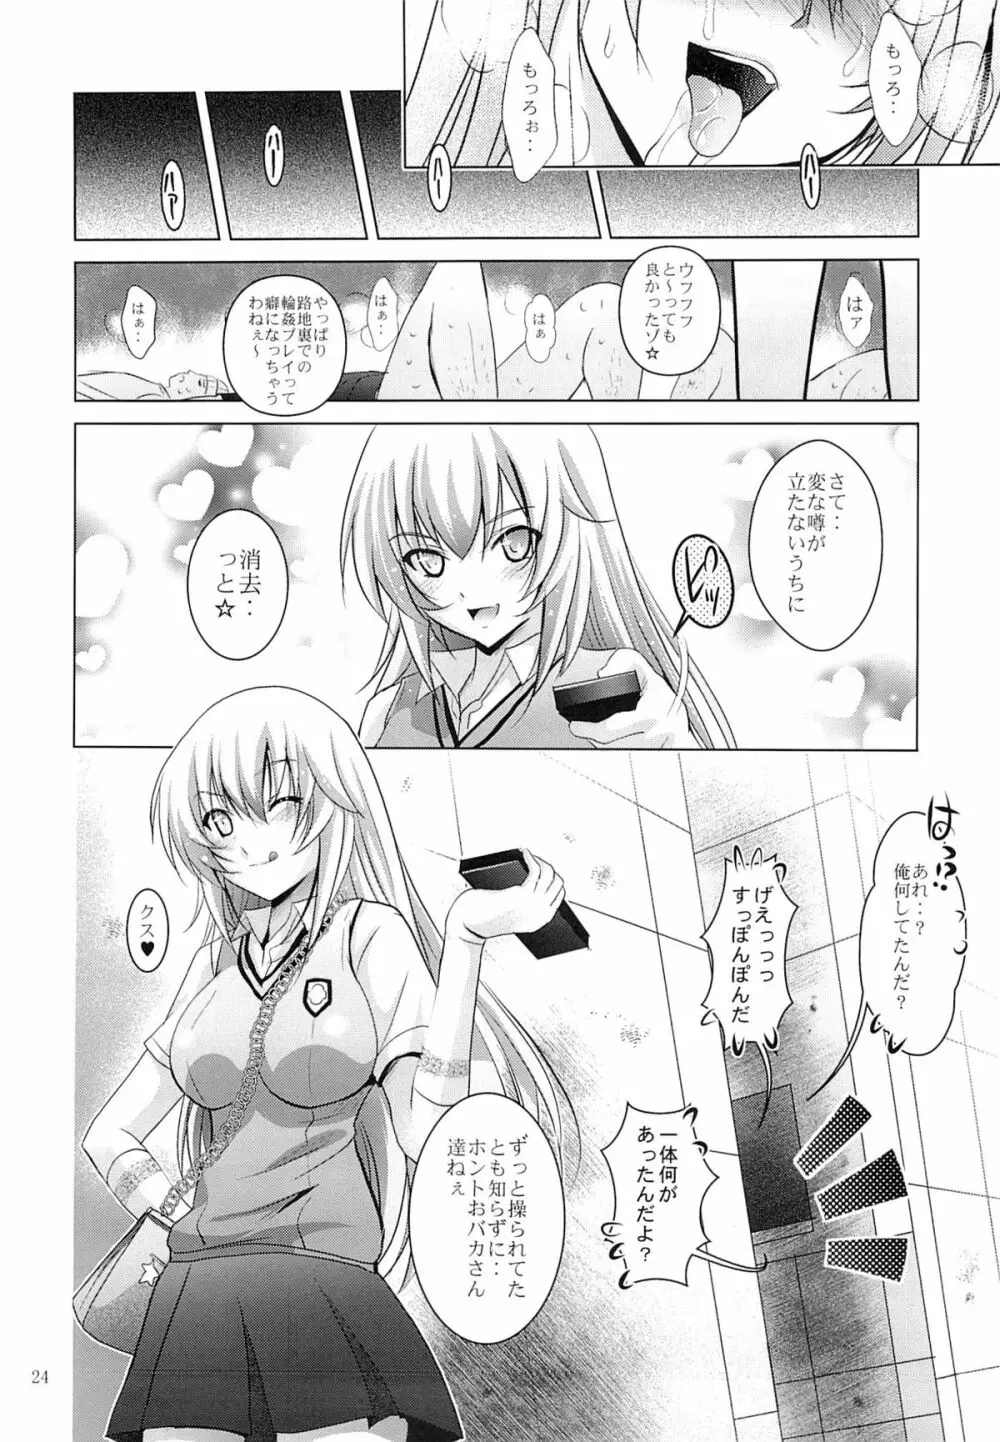 MOUSOU THEATER 41 23ページ